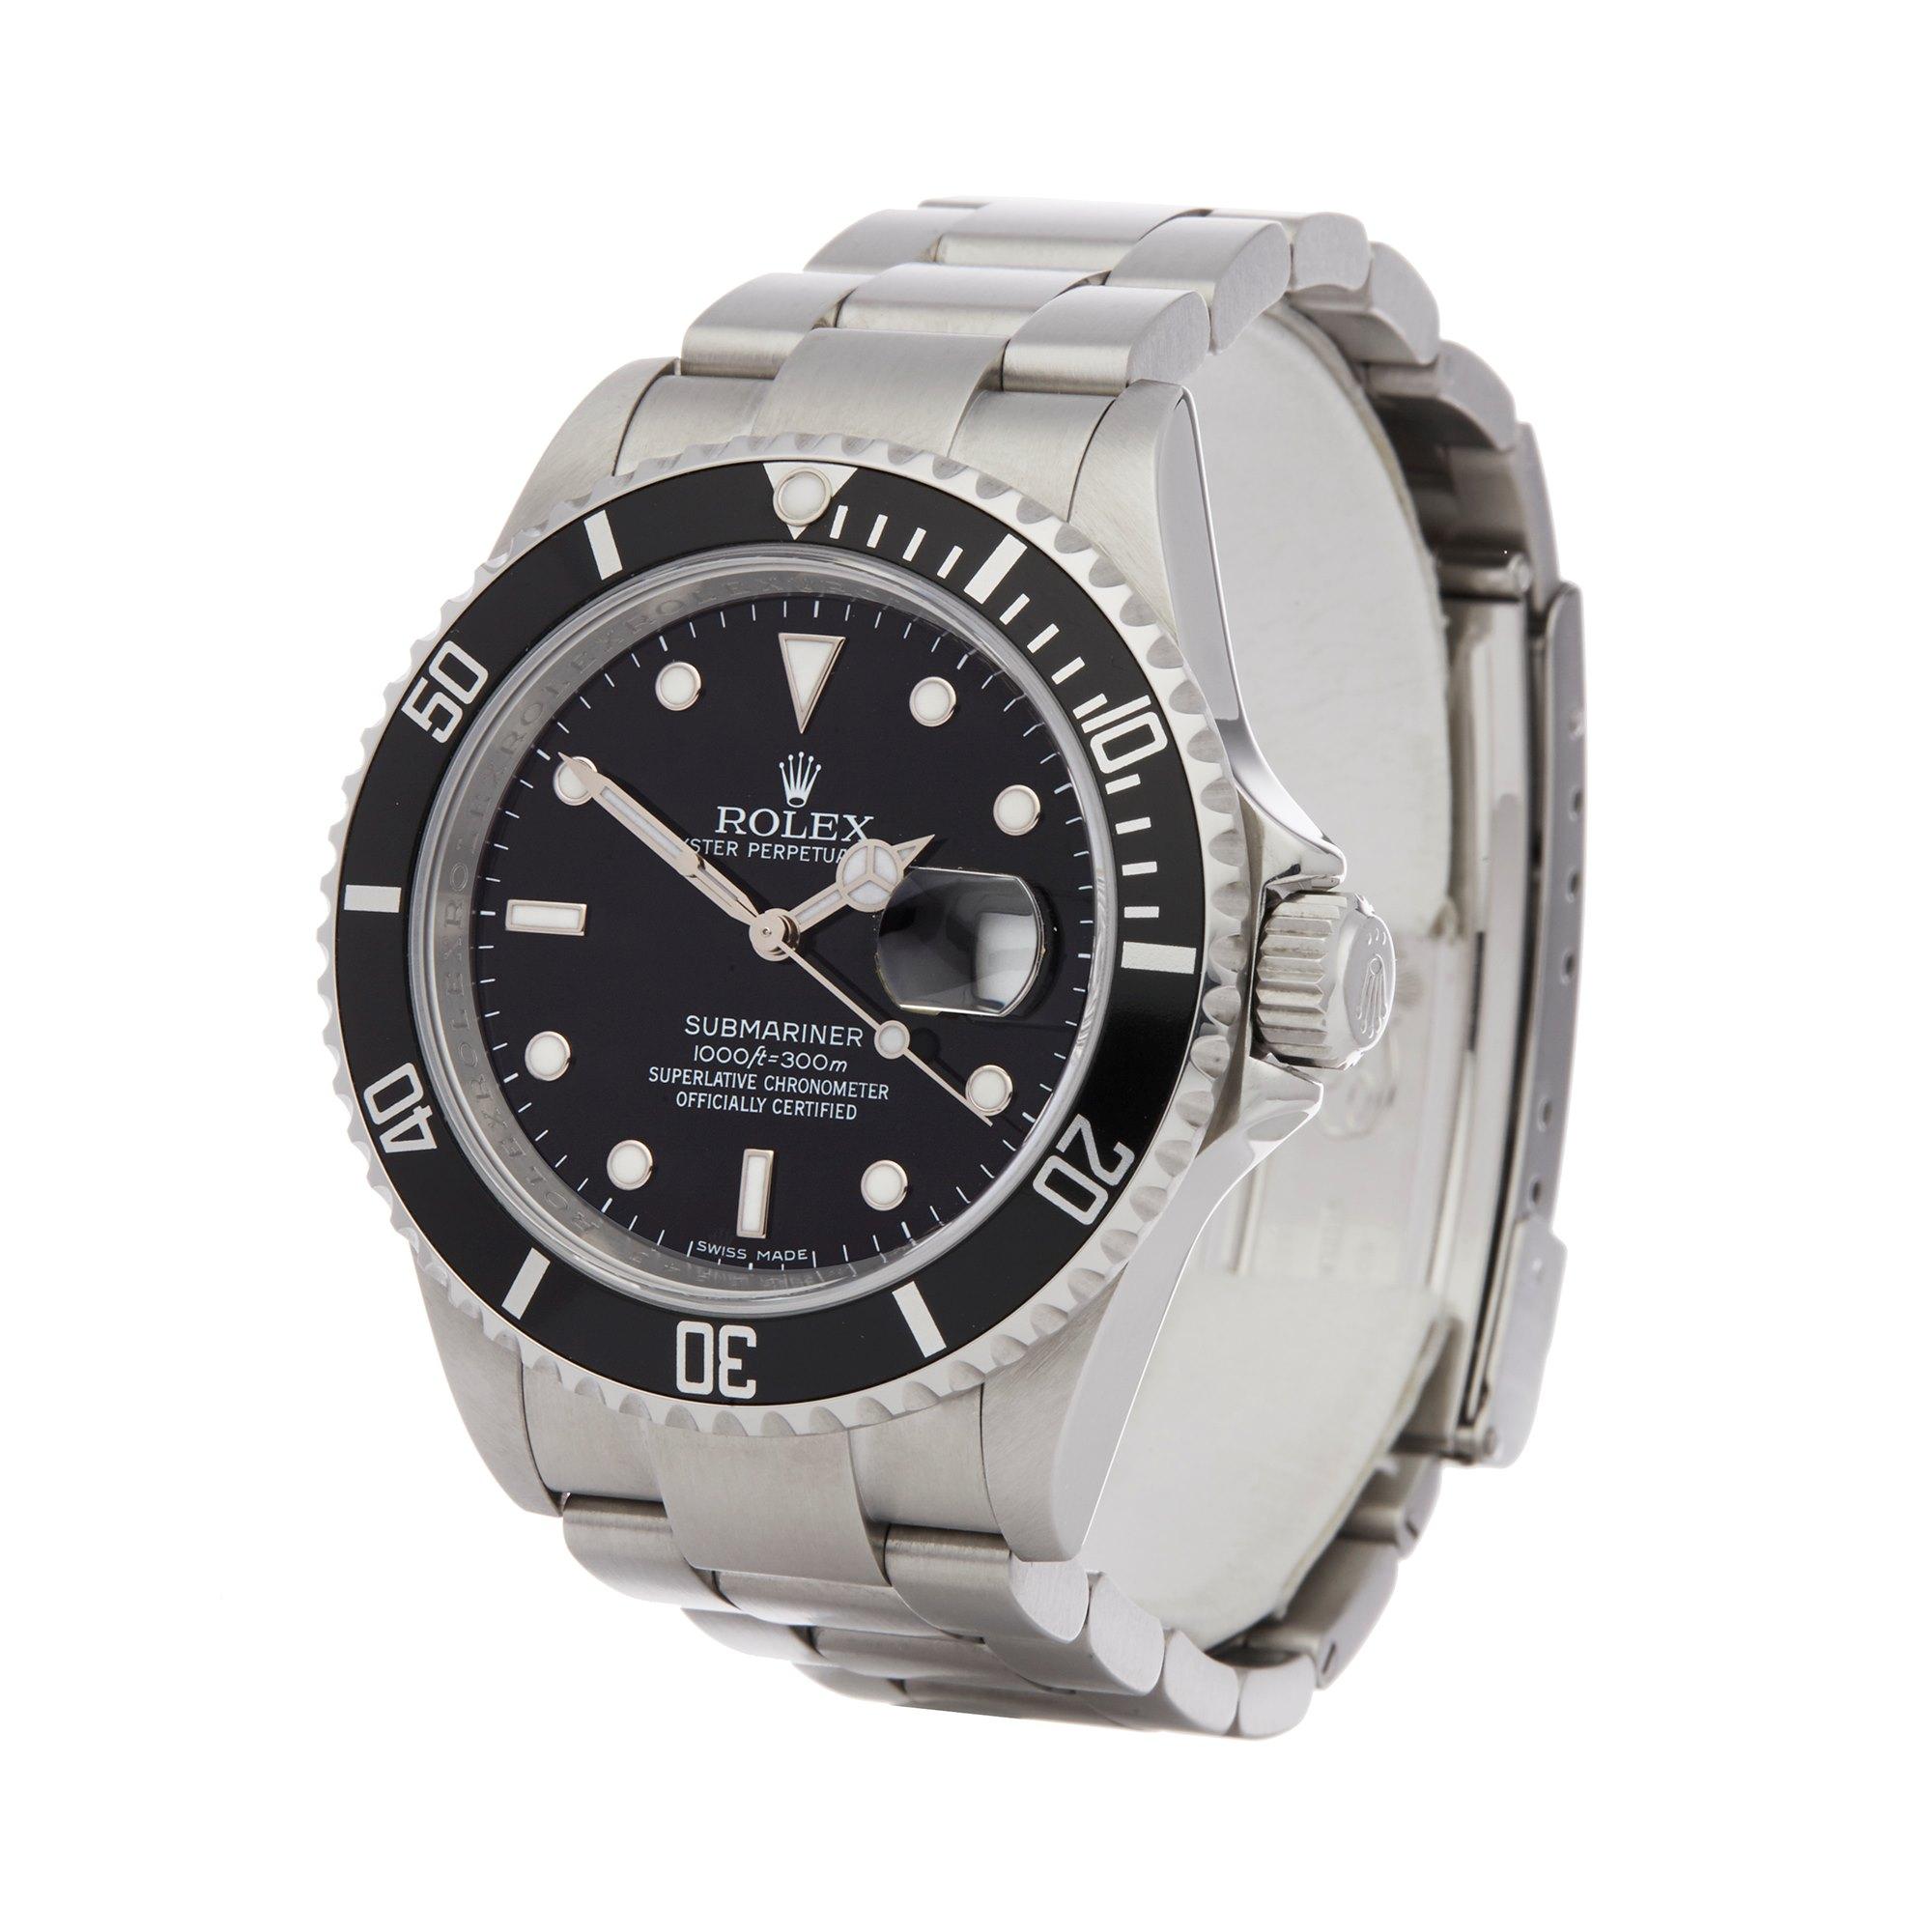 Xupes Reference: W007656
Manufacturer: Rolex
Model: Submariner
Model Variant: Date
Model Number: 16610 
Age: 21-10-2008
Gender: Men
Complete With: Rolex Guarantee
Dial: Black Other
Glass: Sapphire Crystal
Case Size: 40mm
Case Material: Stainless